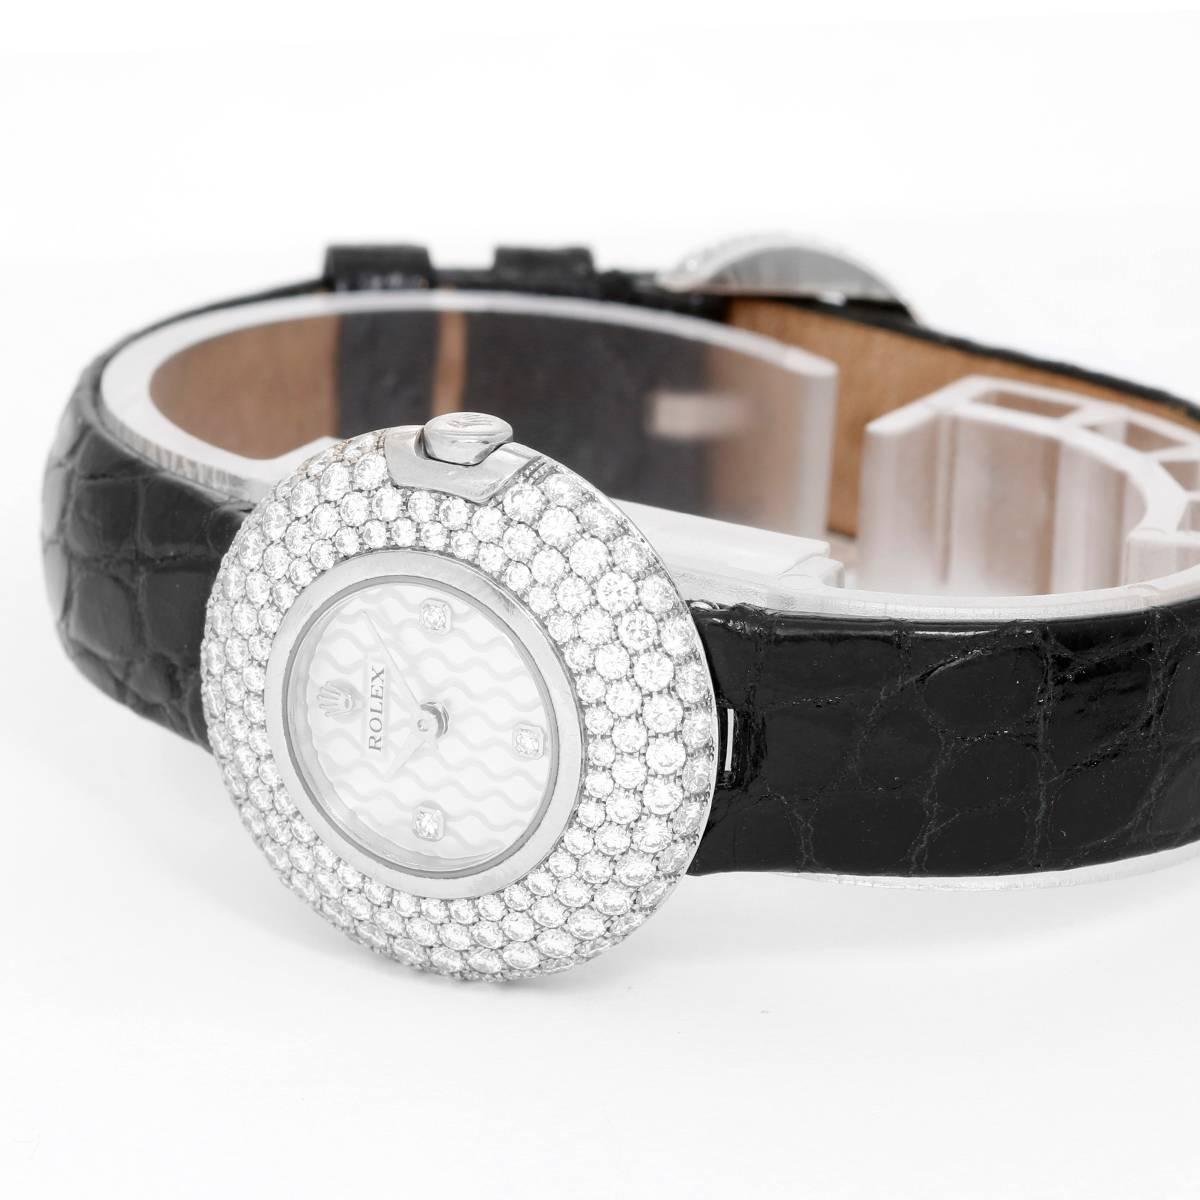 Rolex Cellini Orchid 18k White Gold Ladies Watch with 230 Diamonds  6201/9 BRIL -  Quartz. 18k white gold case, bezel set with 141 diamonds (26mm diameter). Factory mother of pearl diamond dial with 3 diamond hour markers. Black leather strap band;